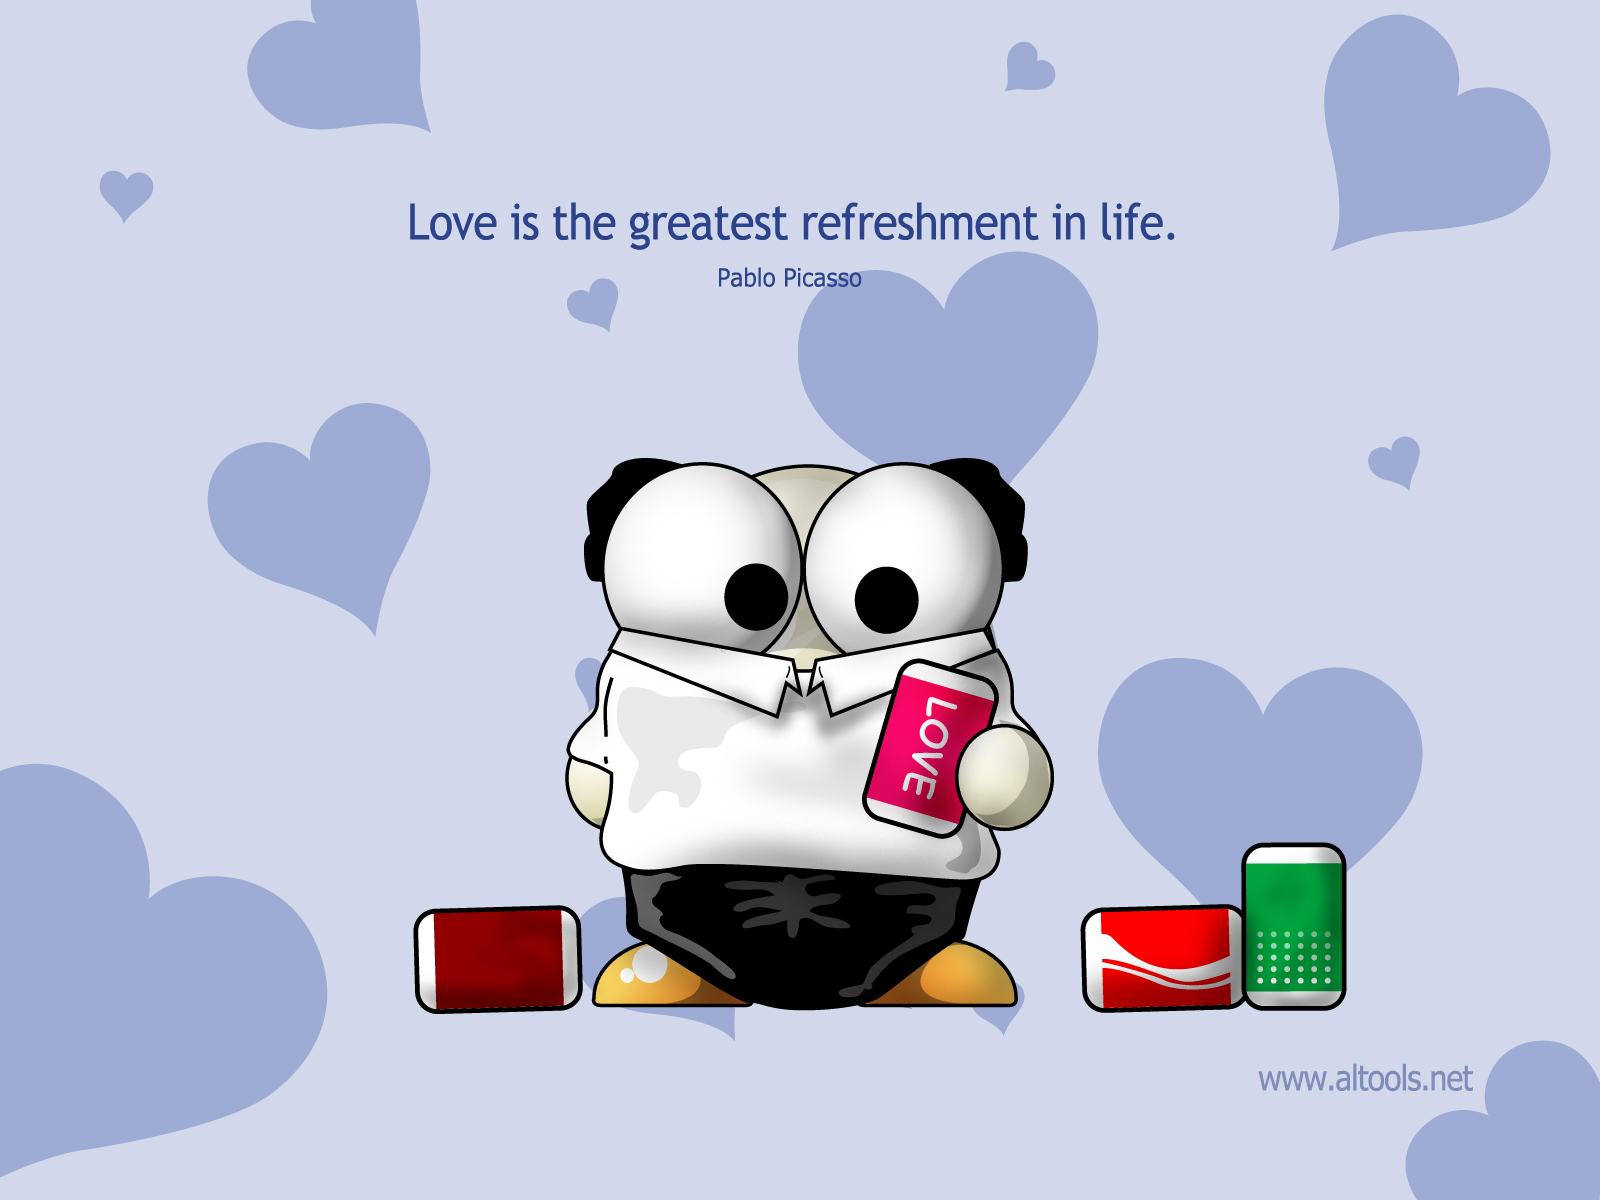 Funny Love Quotes - 1600x1200 Wallpaper 